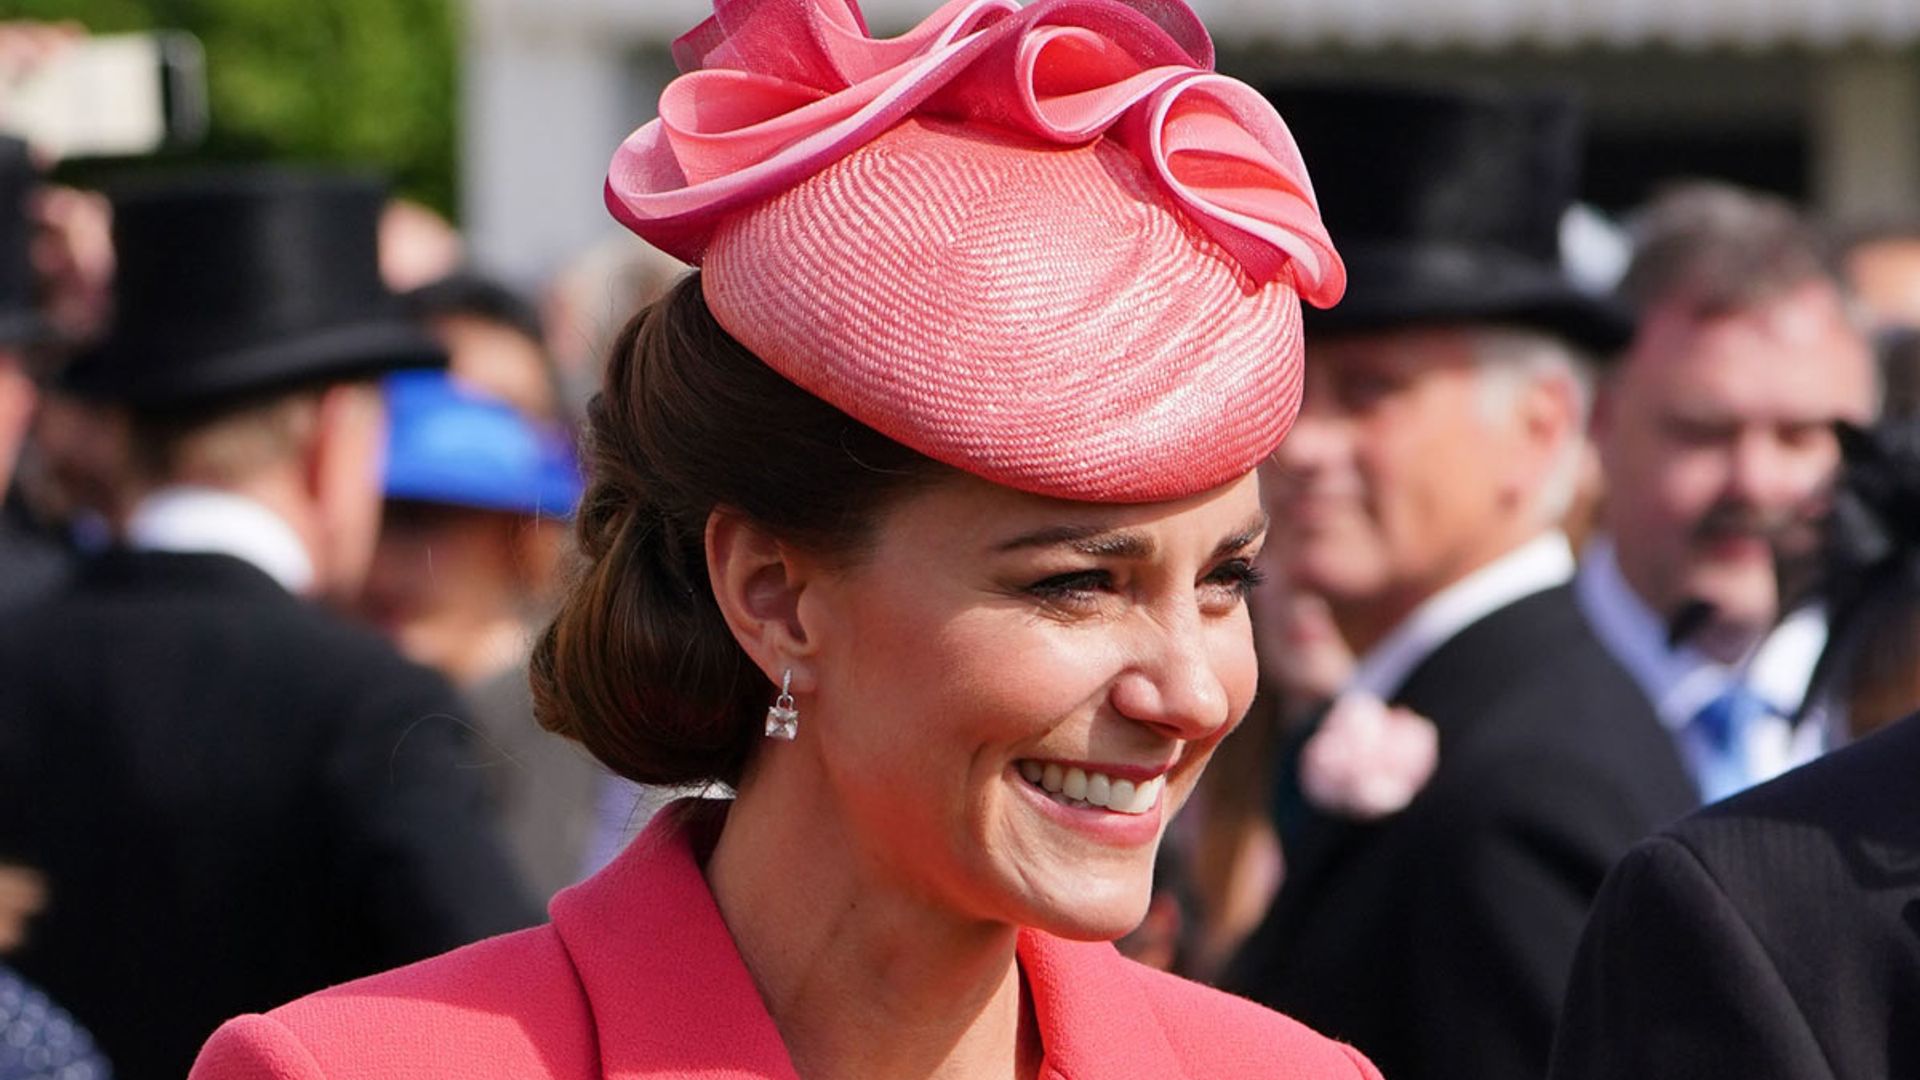 Thrifty Kate Middleton wore an accessory from the 1930s - did you spot it?